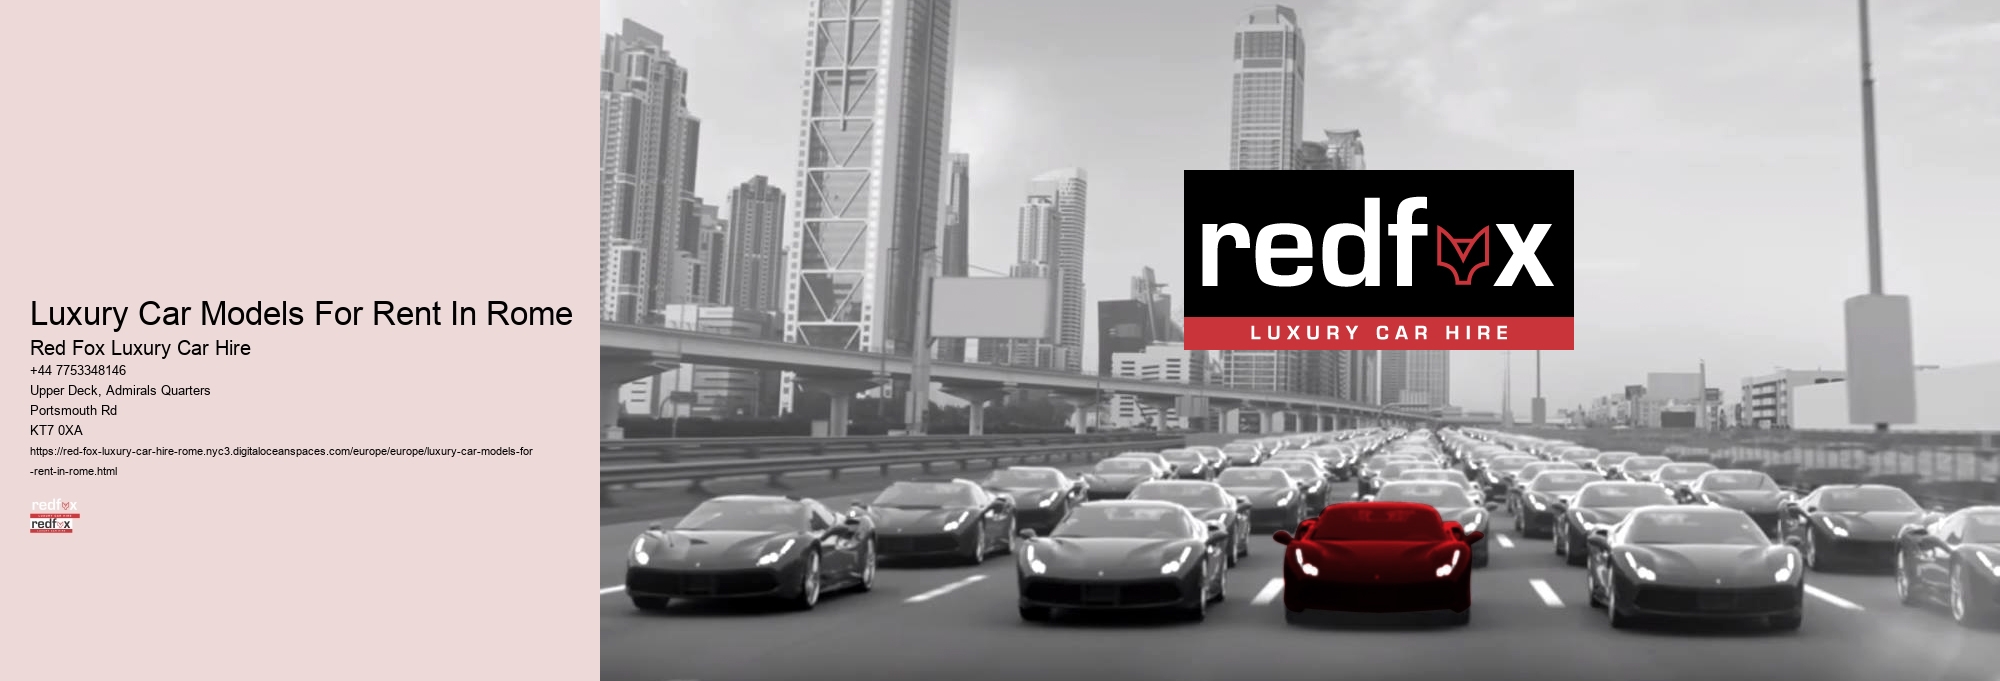 Luxury Car Models For Rent In Rome